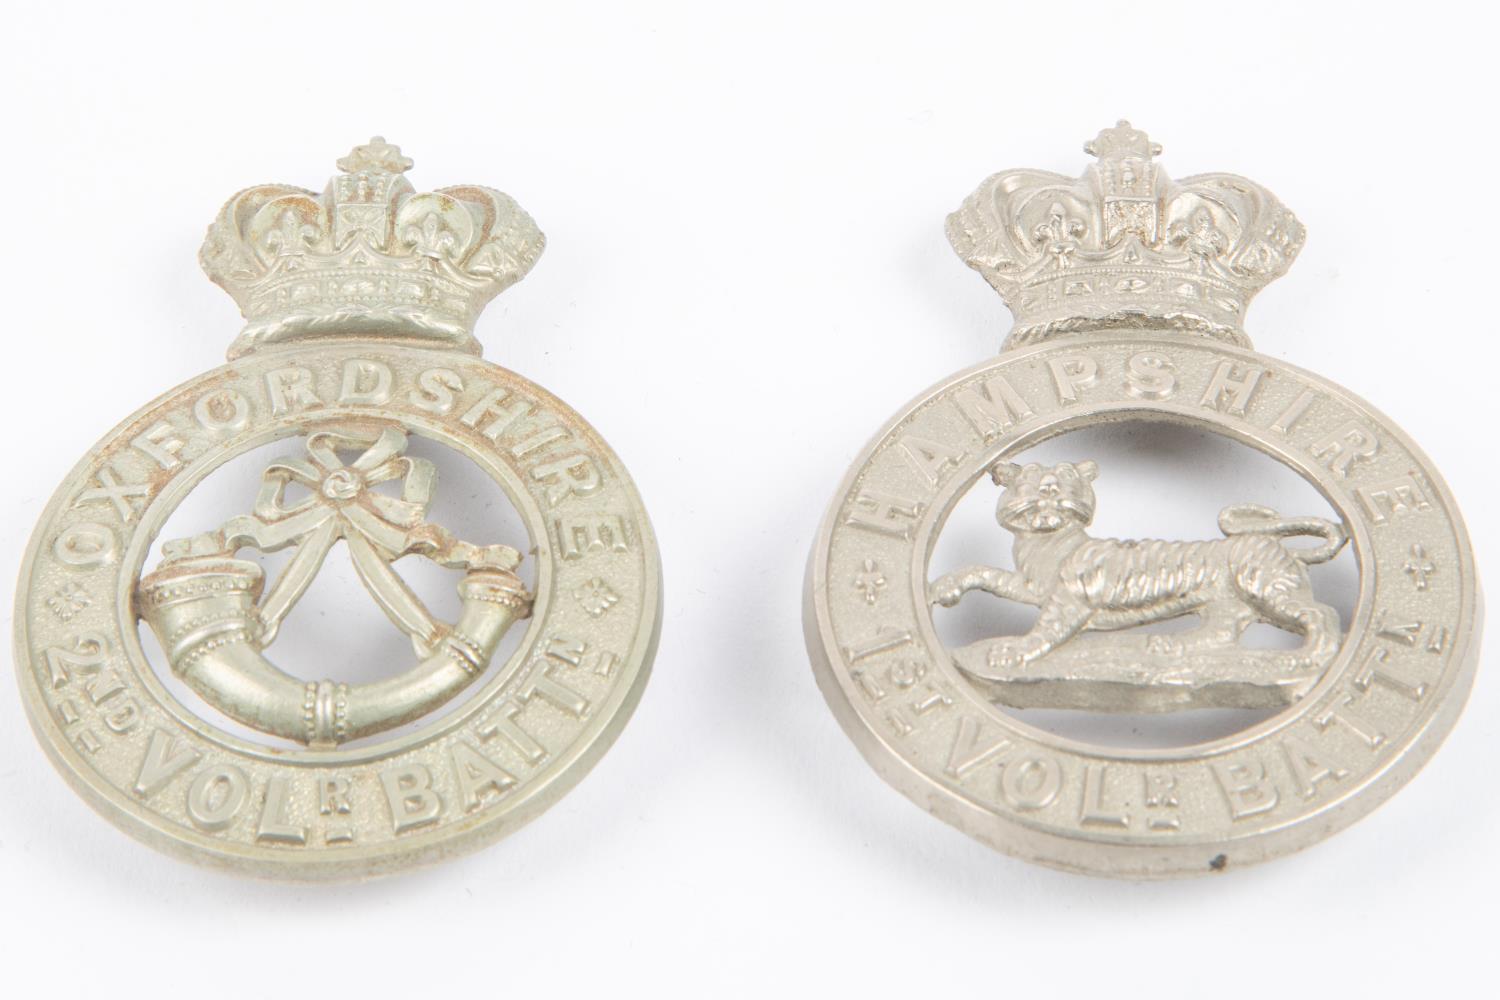 A Victorian WM glengarry badge of the 1st Vol Bn The Hampshire Regt; and another of the 2nd Vol Bn